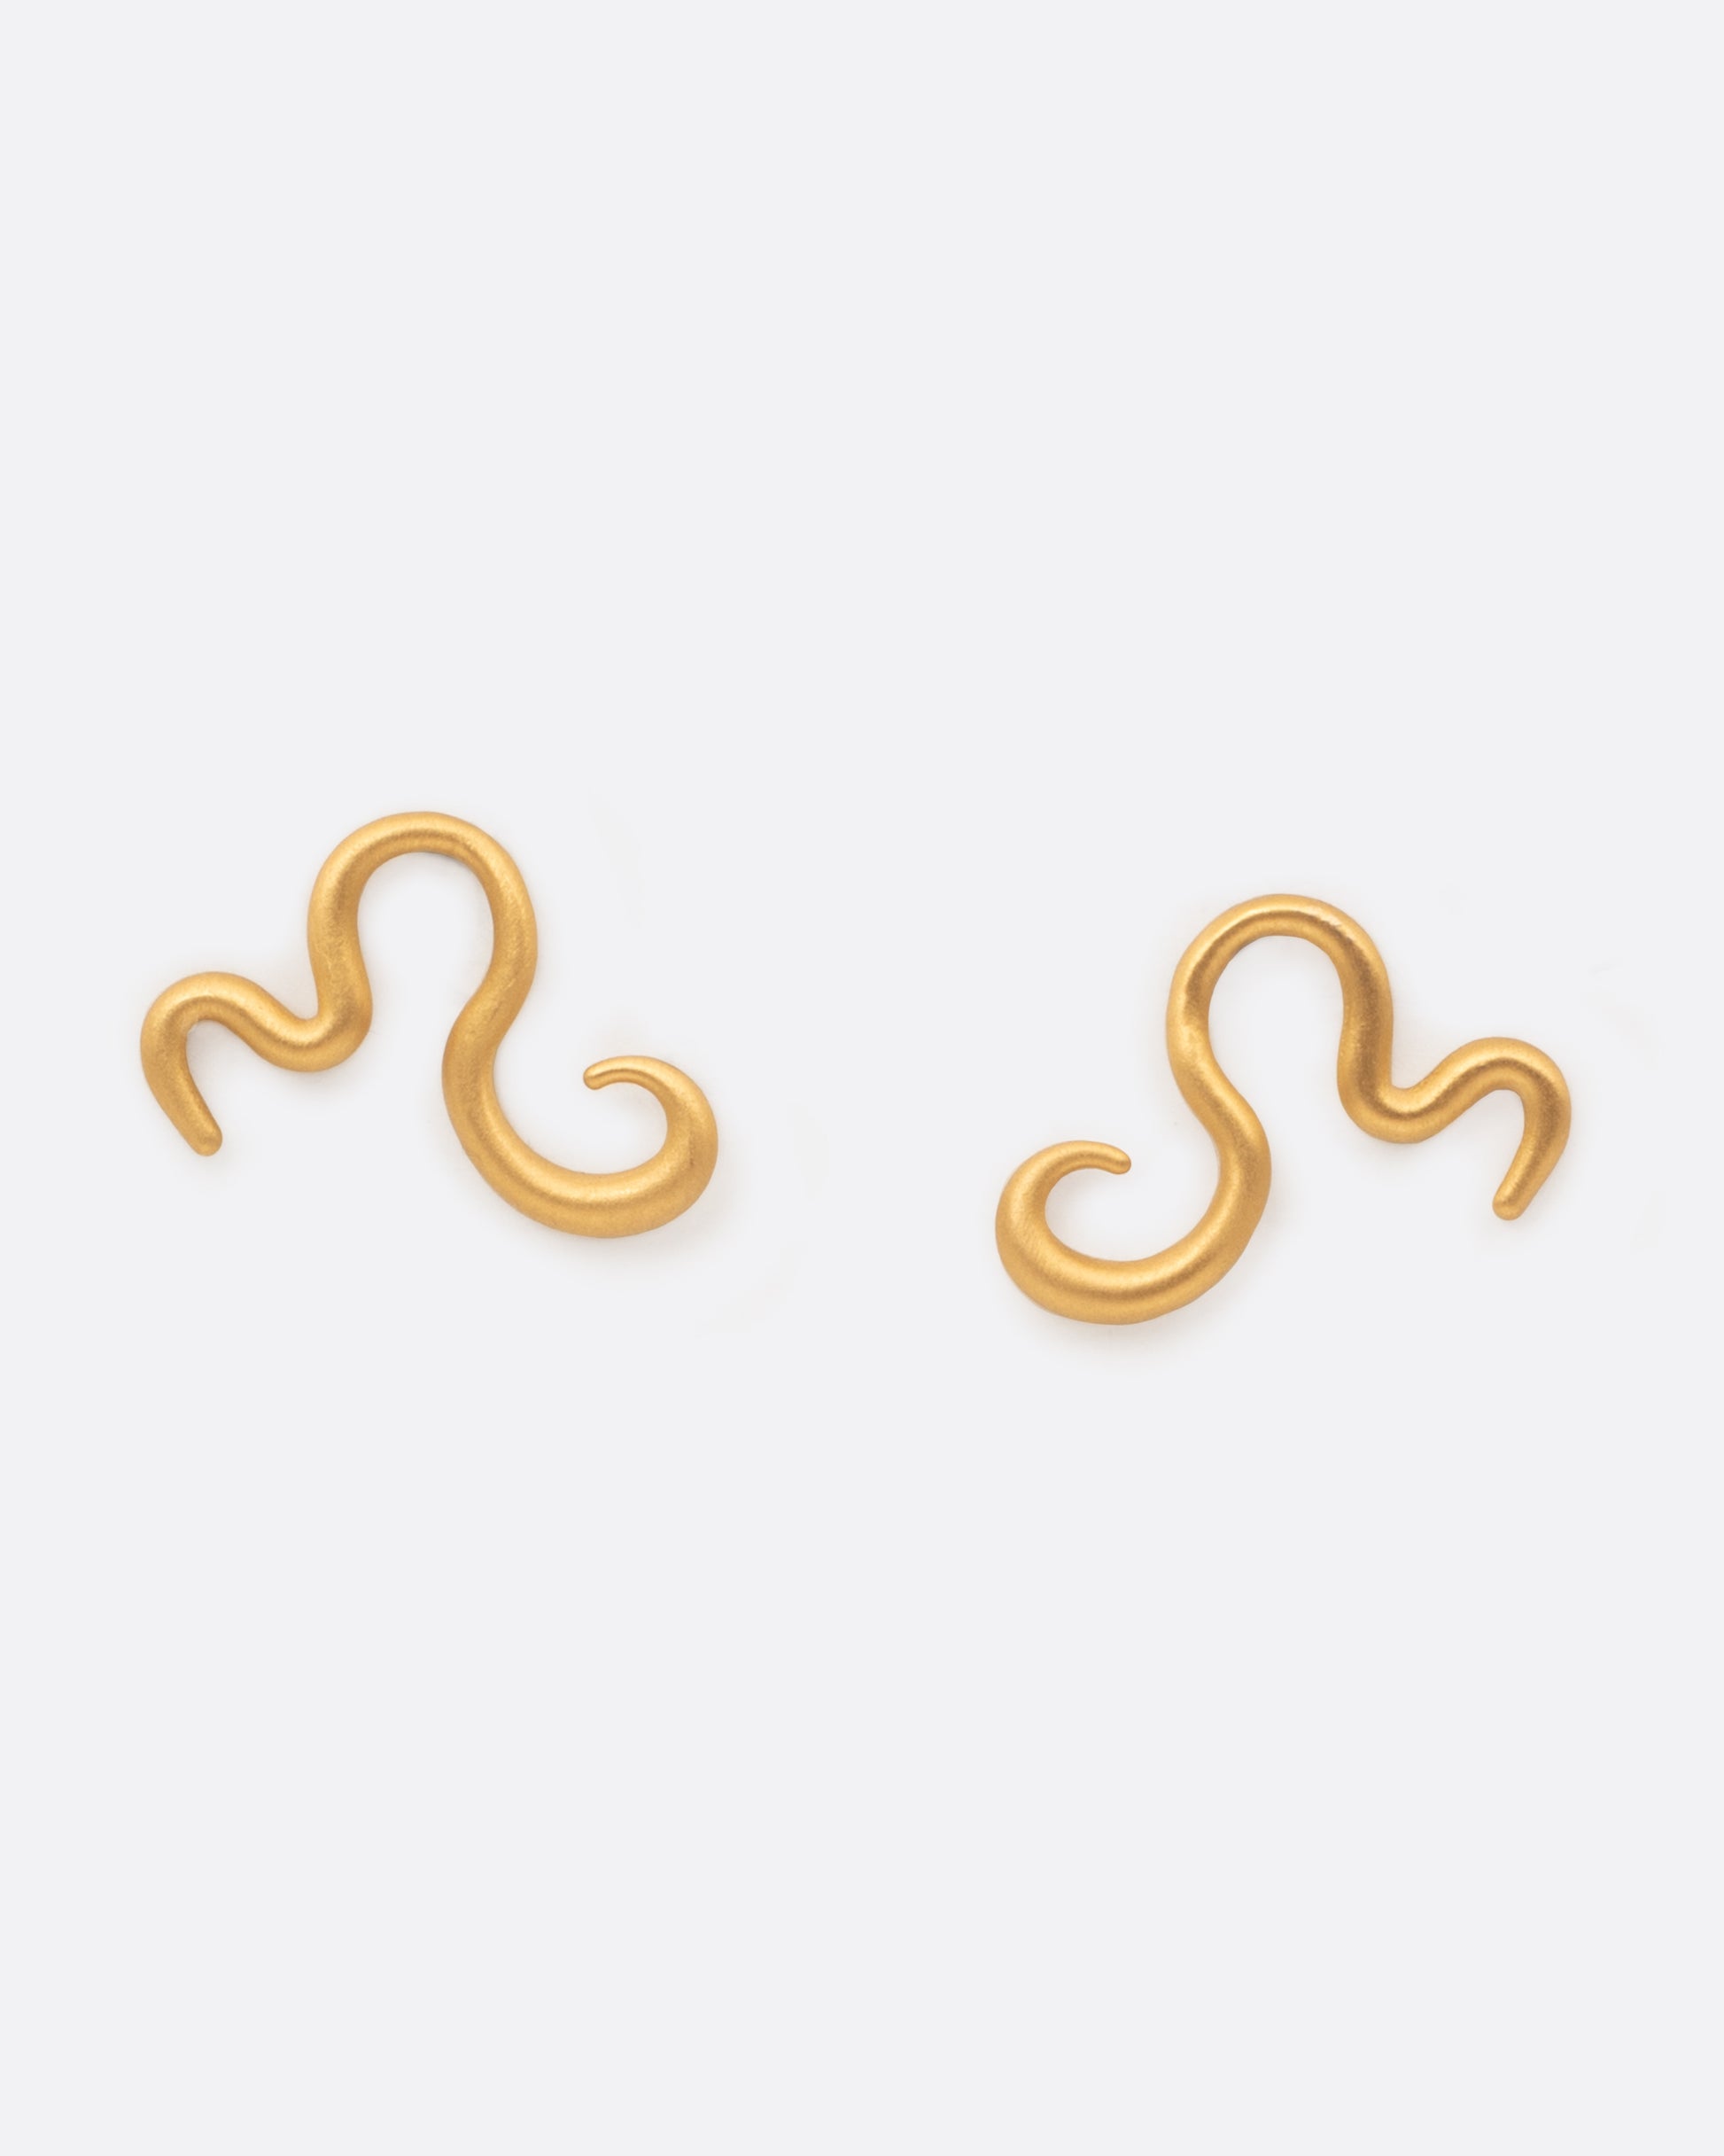 Curved 22k yellow gold snake stud earrings, shown as a pair.